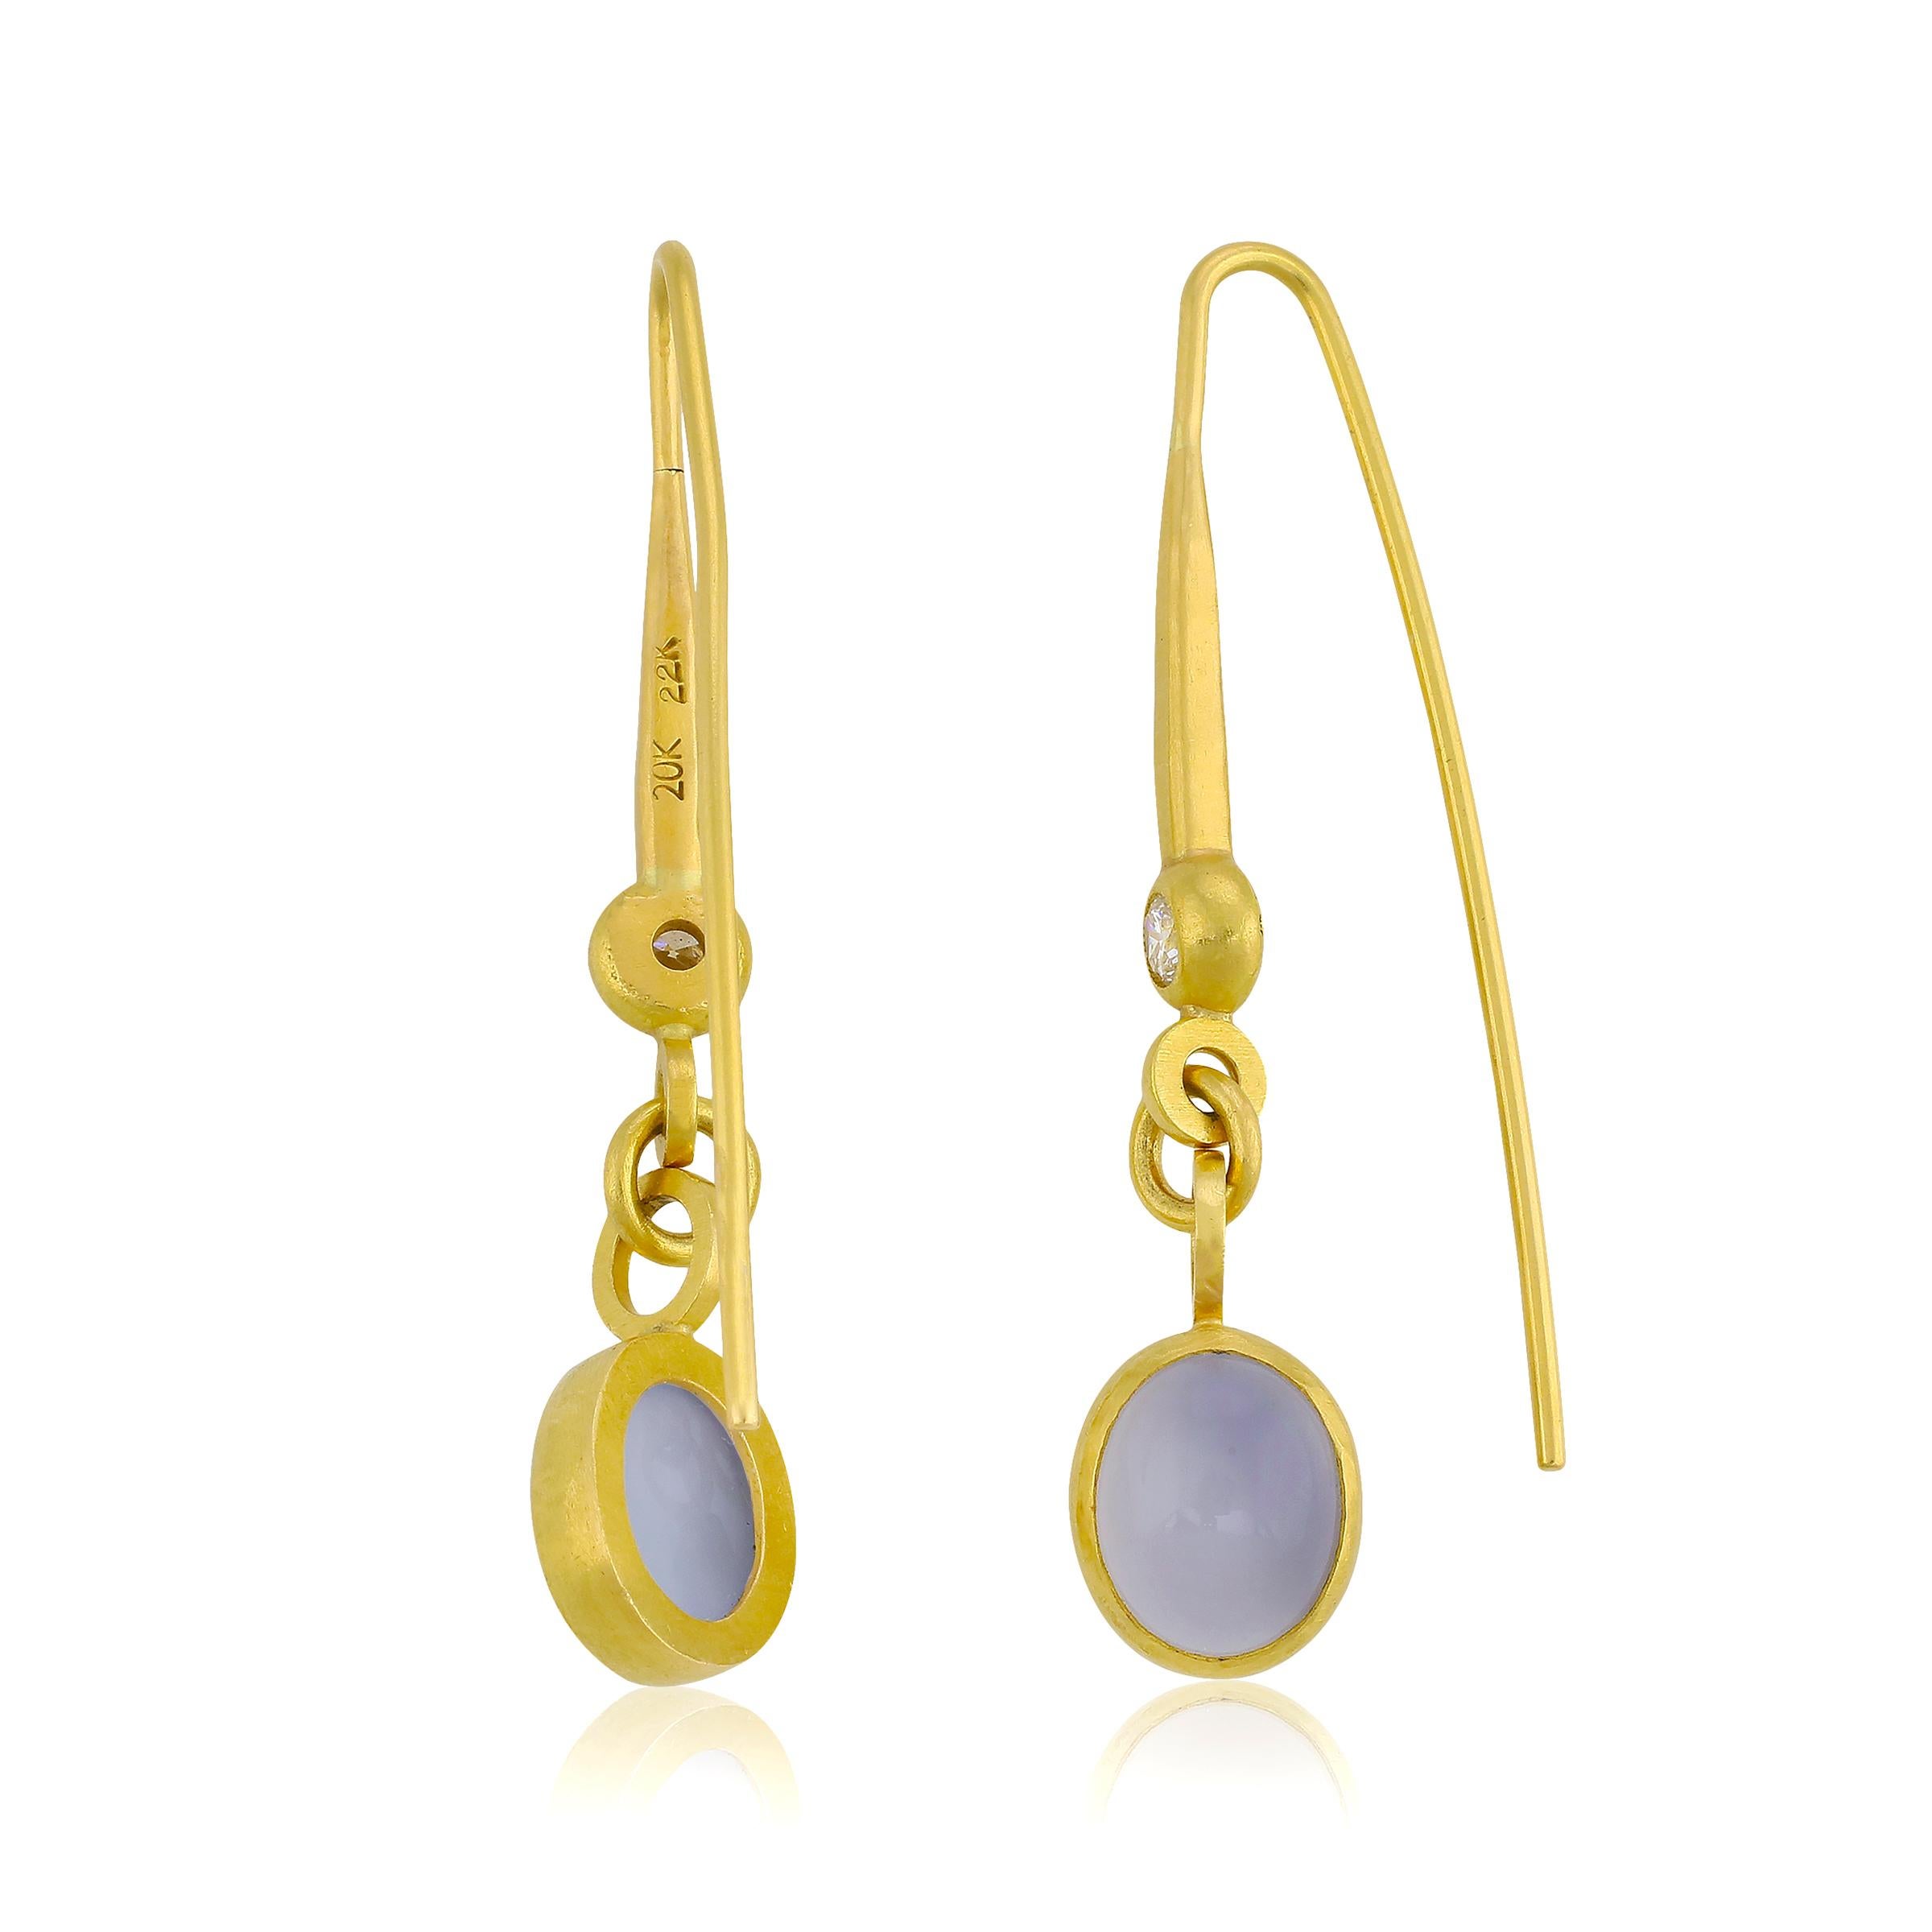 Round Cut PHILIPPE SPENCER Colorless Diamonds & Chalcedony in 22K & 20K Gold Earrings For Sale